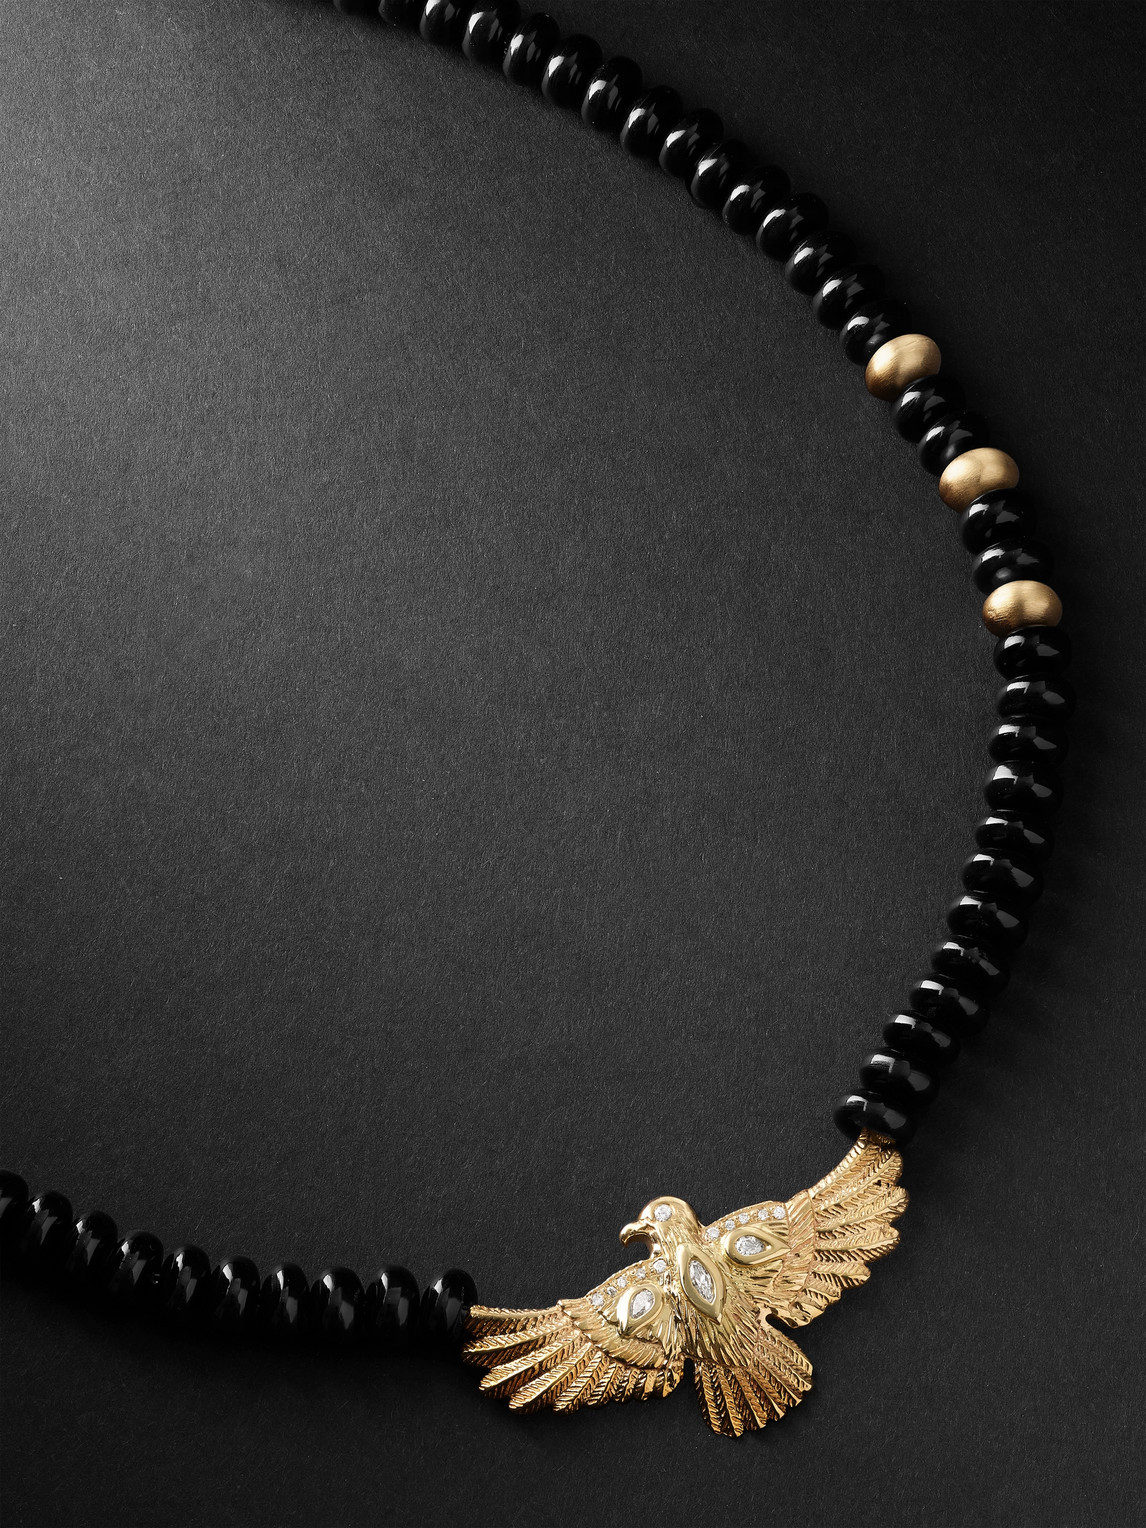 Jacquie Aiche Gold, Onyx And Diamond Beaded Necklace